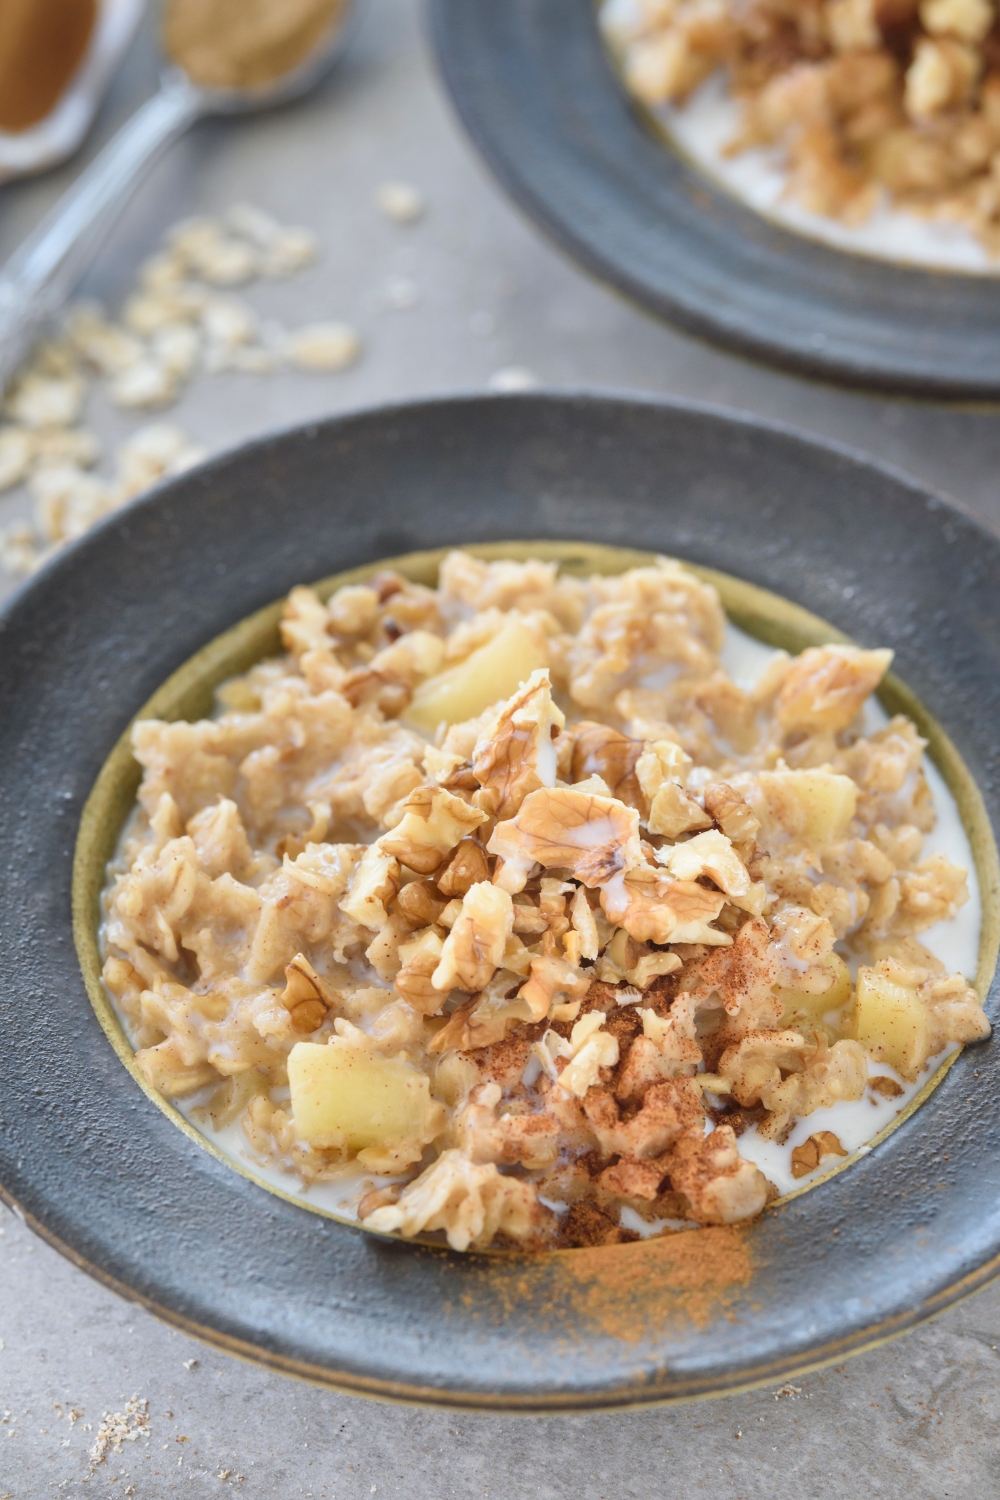 A bowl if oatmeal with milk covered in diced apples, chopped nuts, and ground cinnamon. In the background is a second bowl of oatmeal.